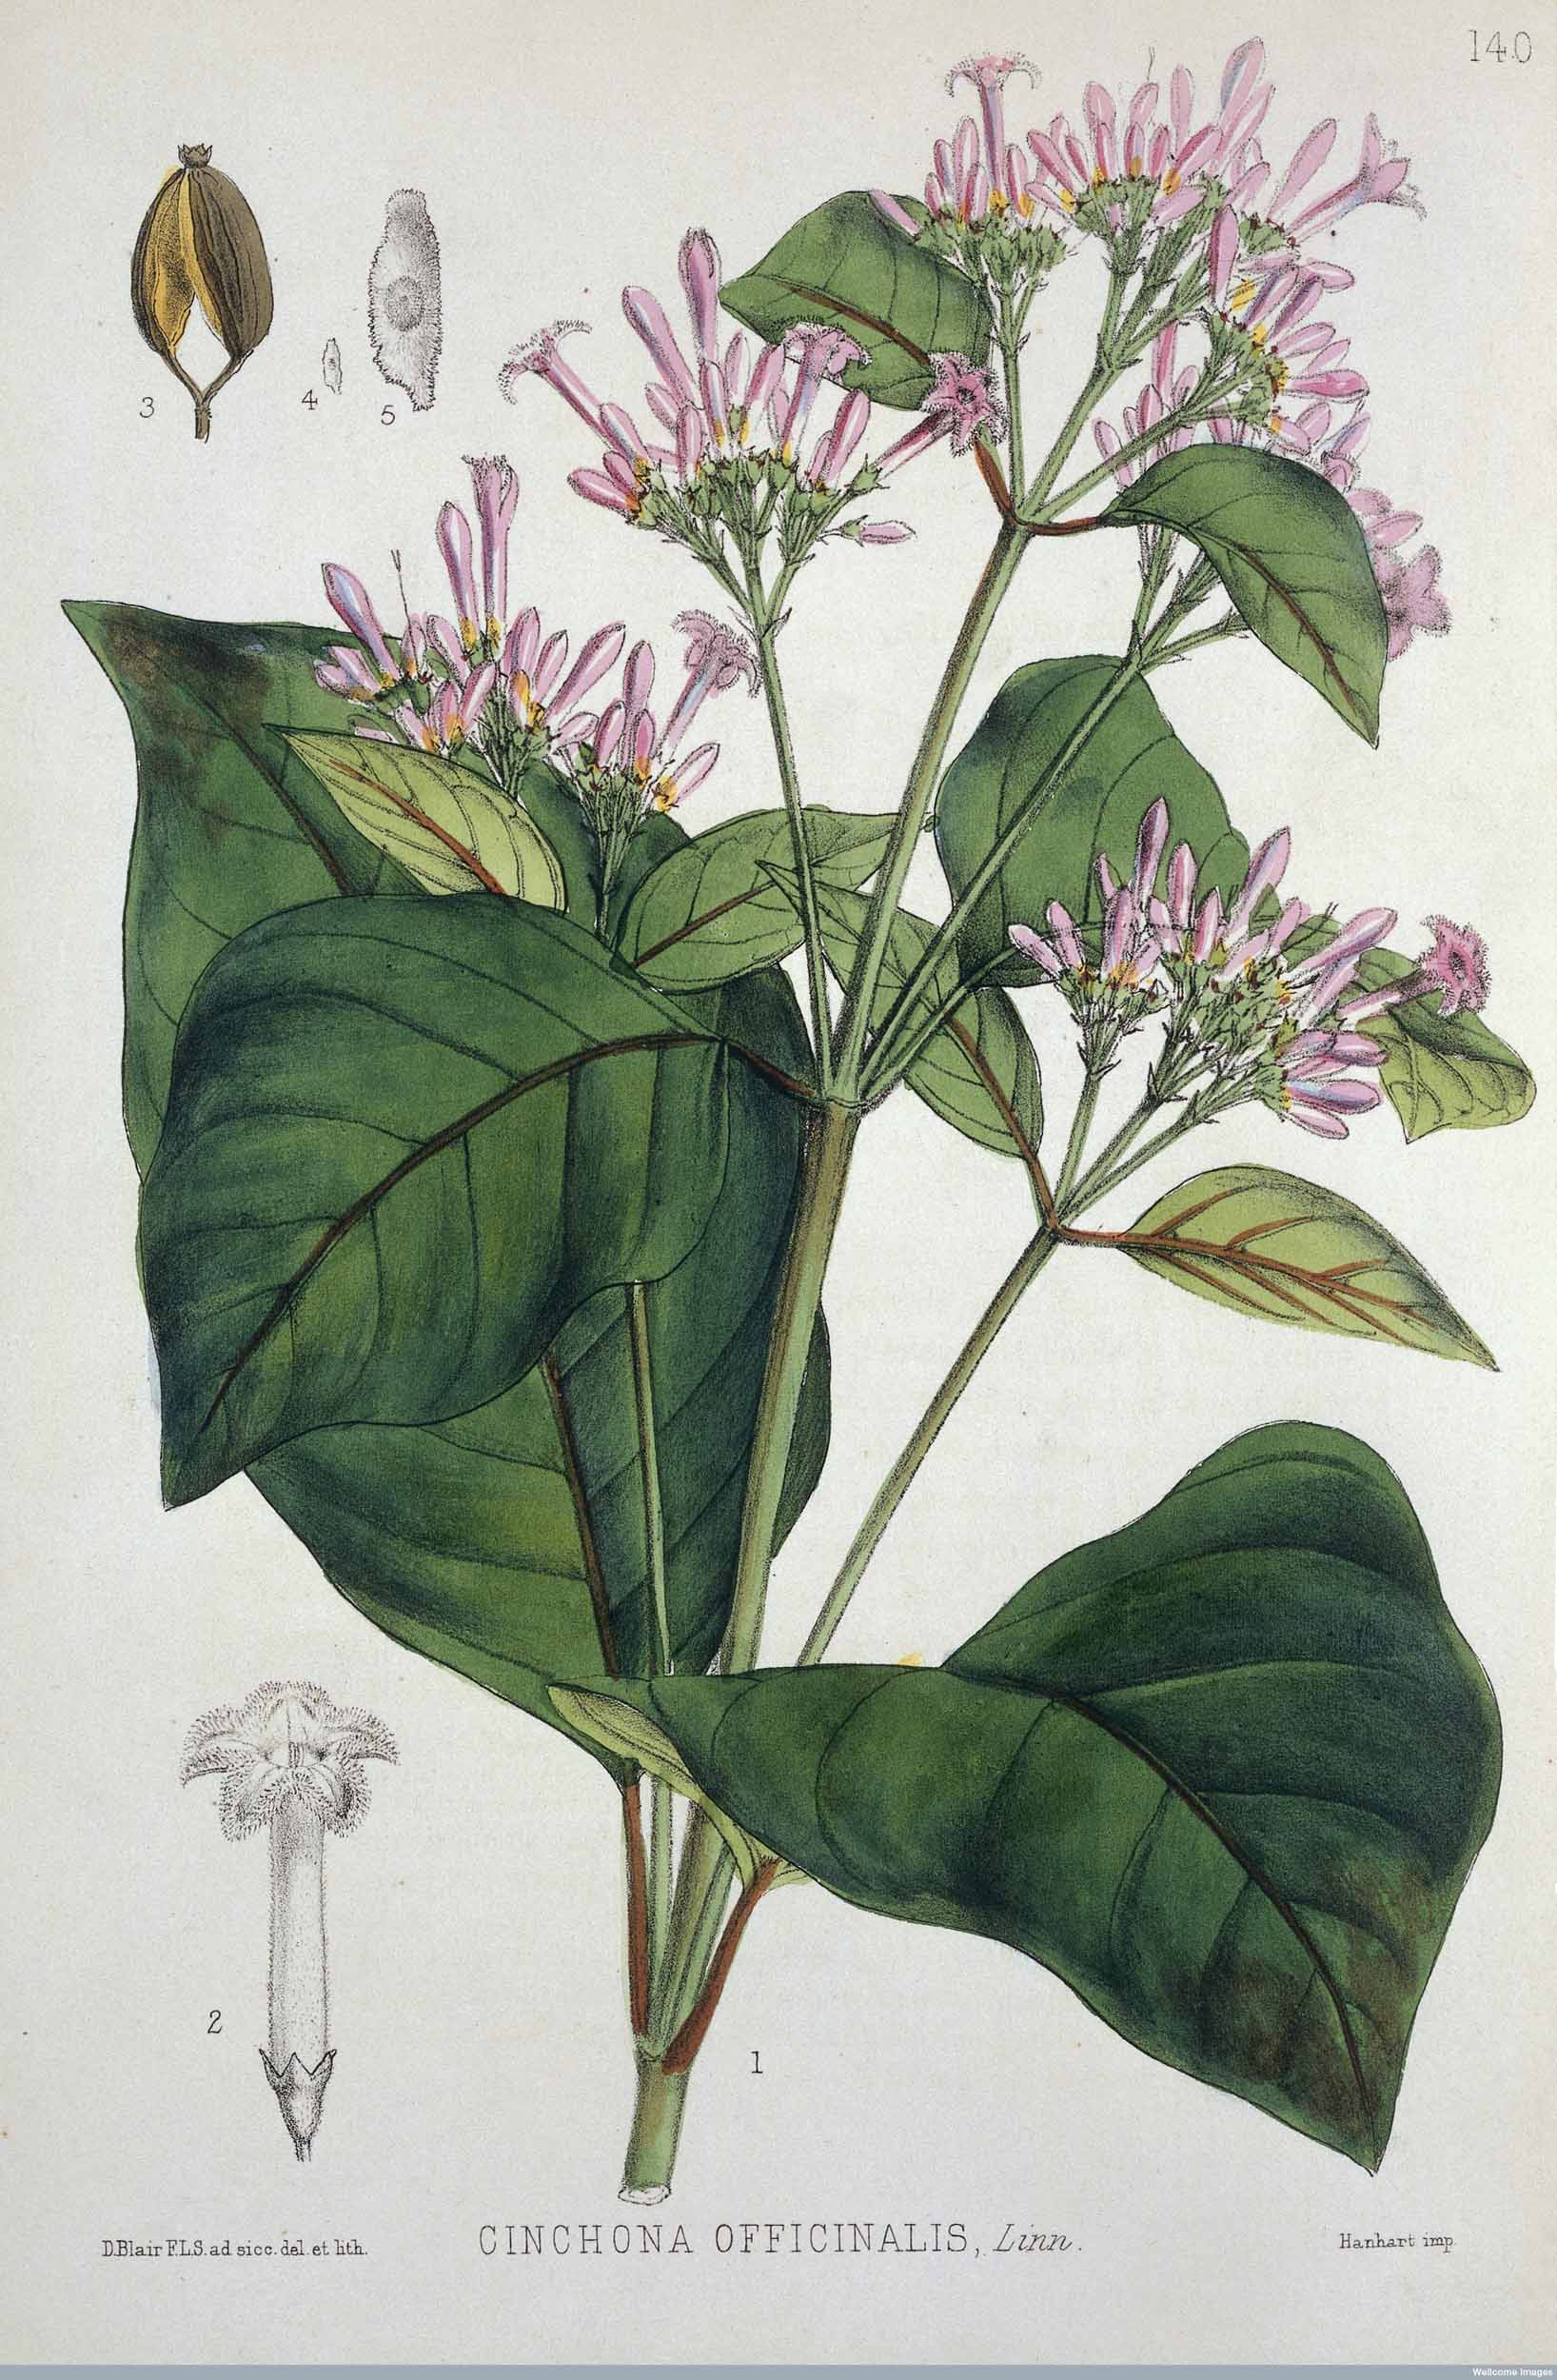 Cinchona plant from which quinine is extracted (from Robert Bentley's Medicinal Plants), 1880. Creative Commons Attribution 4.0 International (https://creativecommons.org/licenses/by/4.0/).